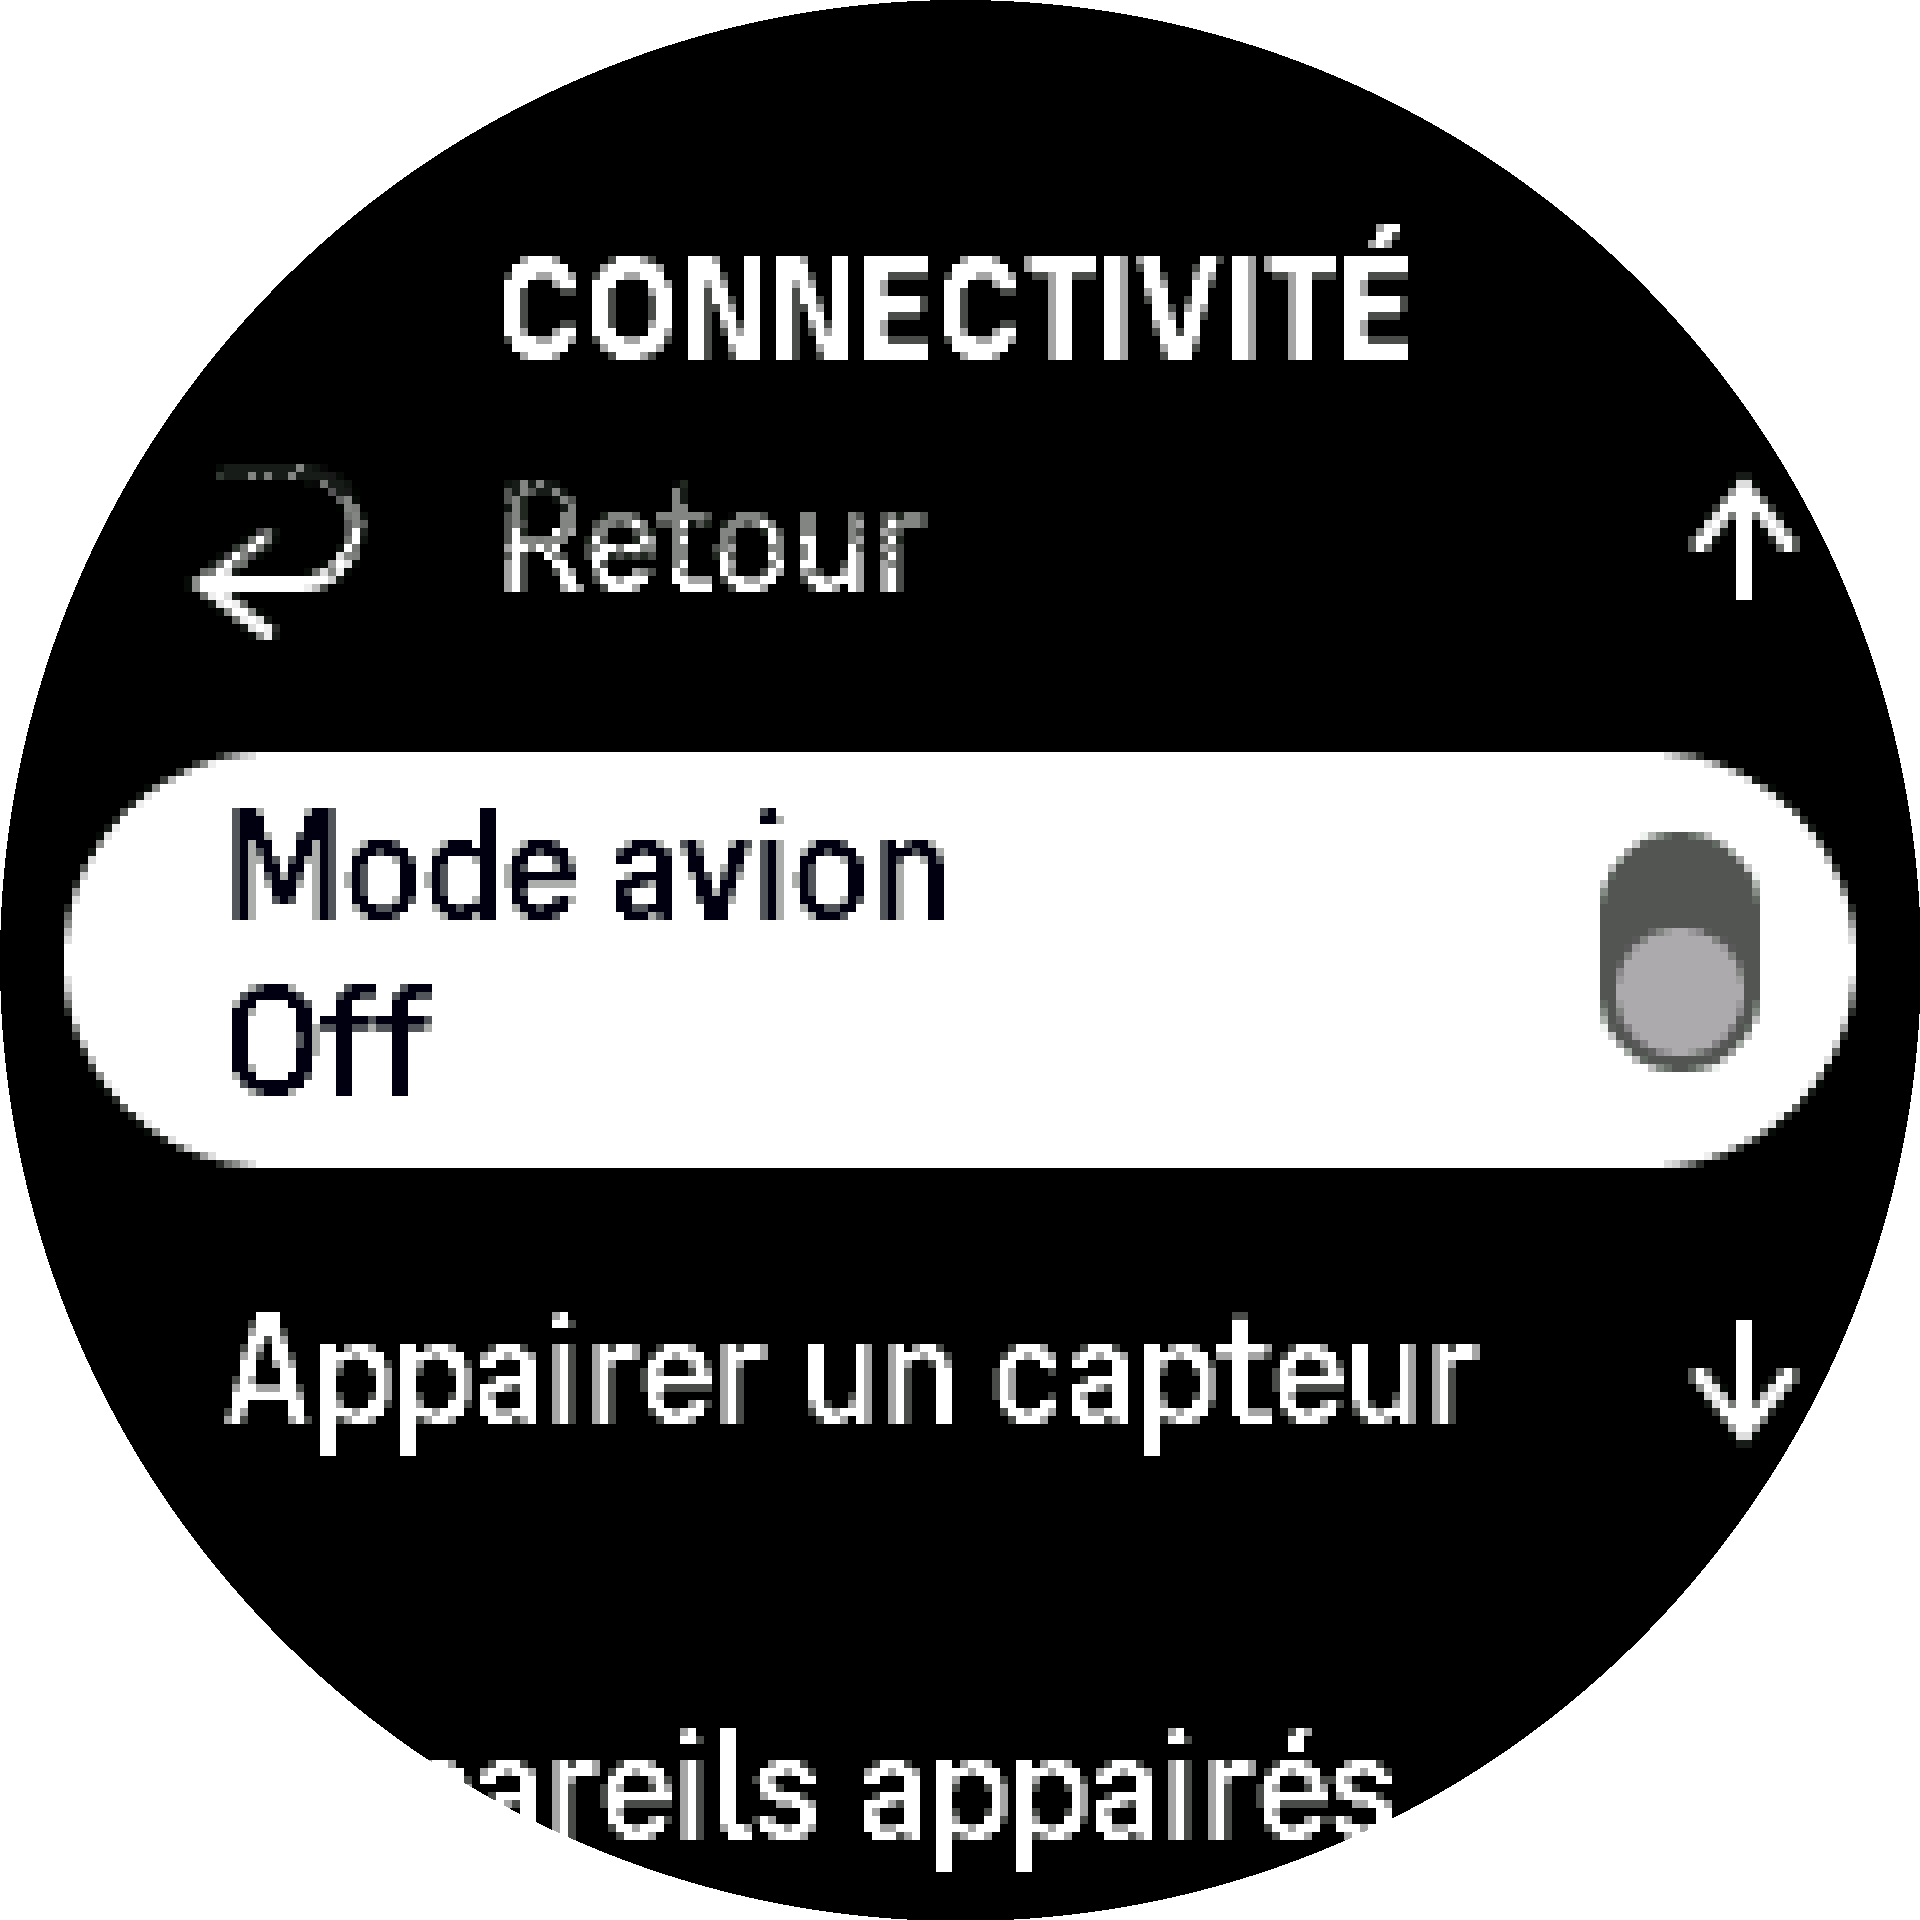 Airplane mode S9PP